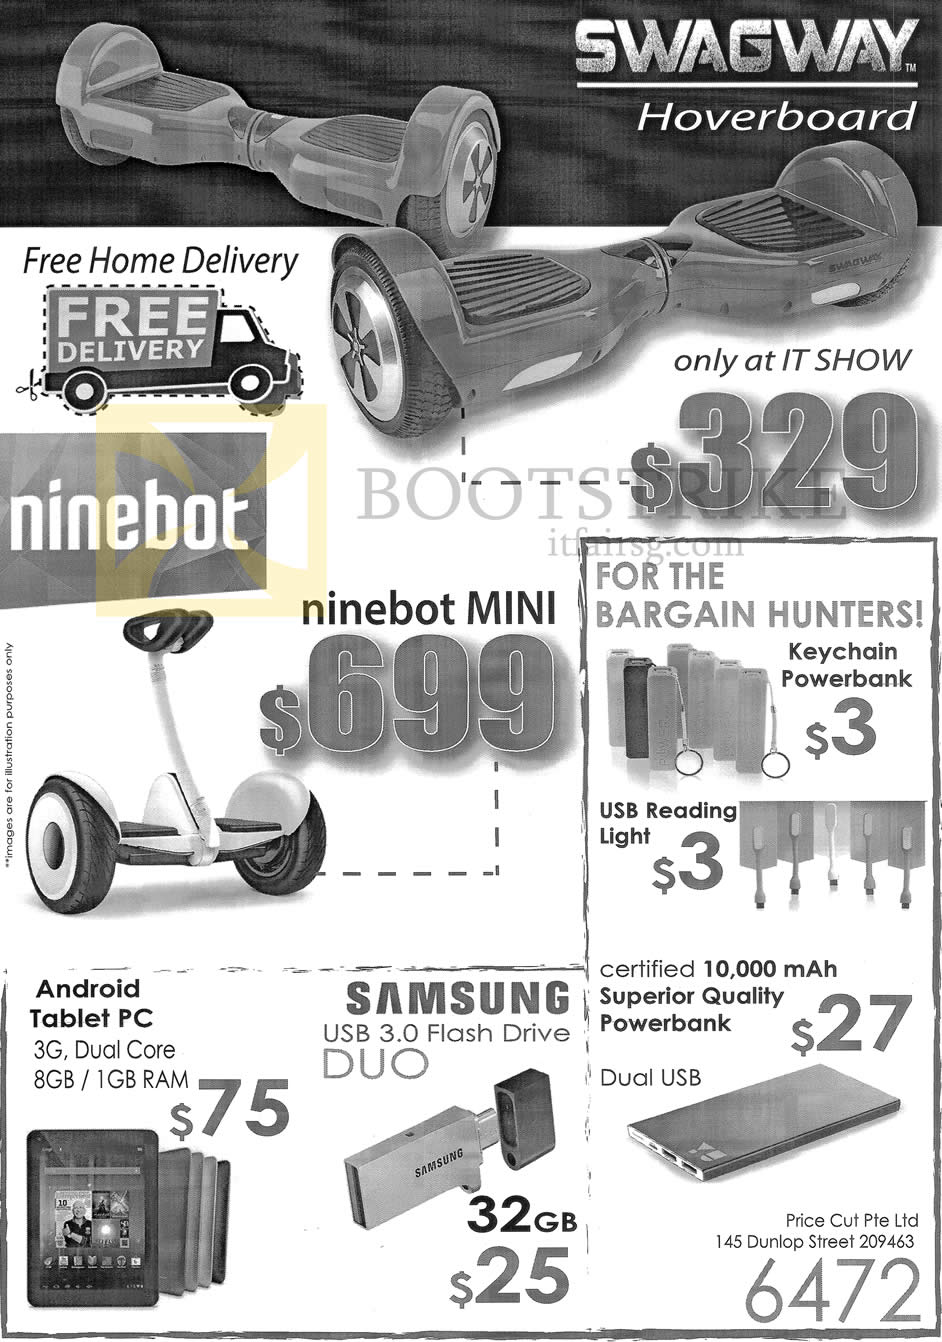 IT SHOW 2016 price list image brochure of Nasa Swagway Ninebot Mini, Android Tablet PC, Samsung Duo USB 3.0 Flash Drive